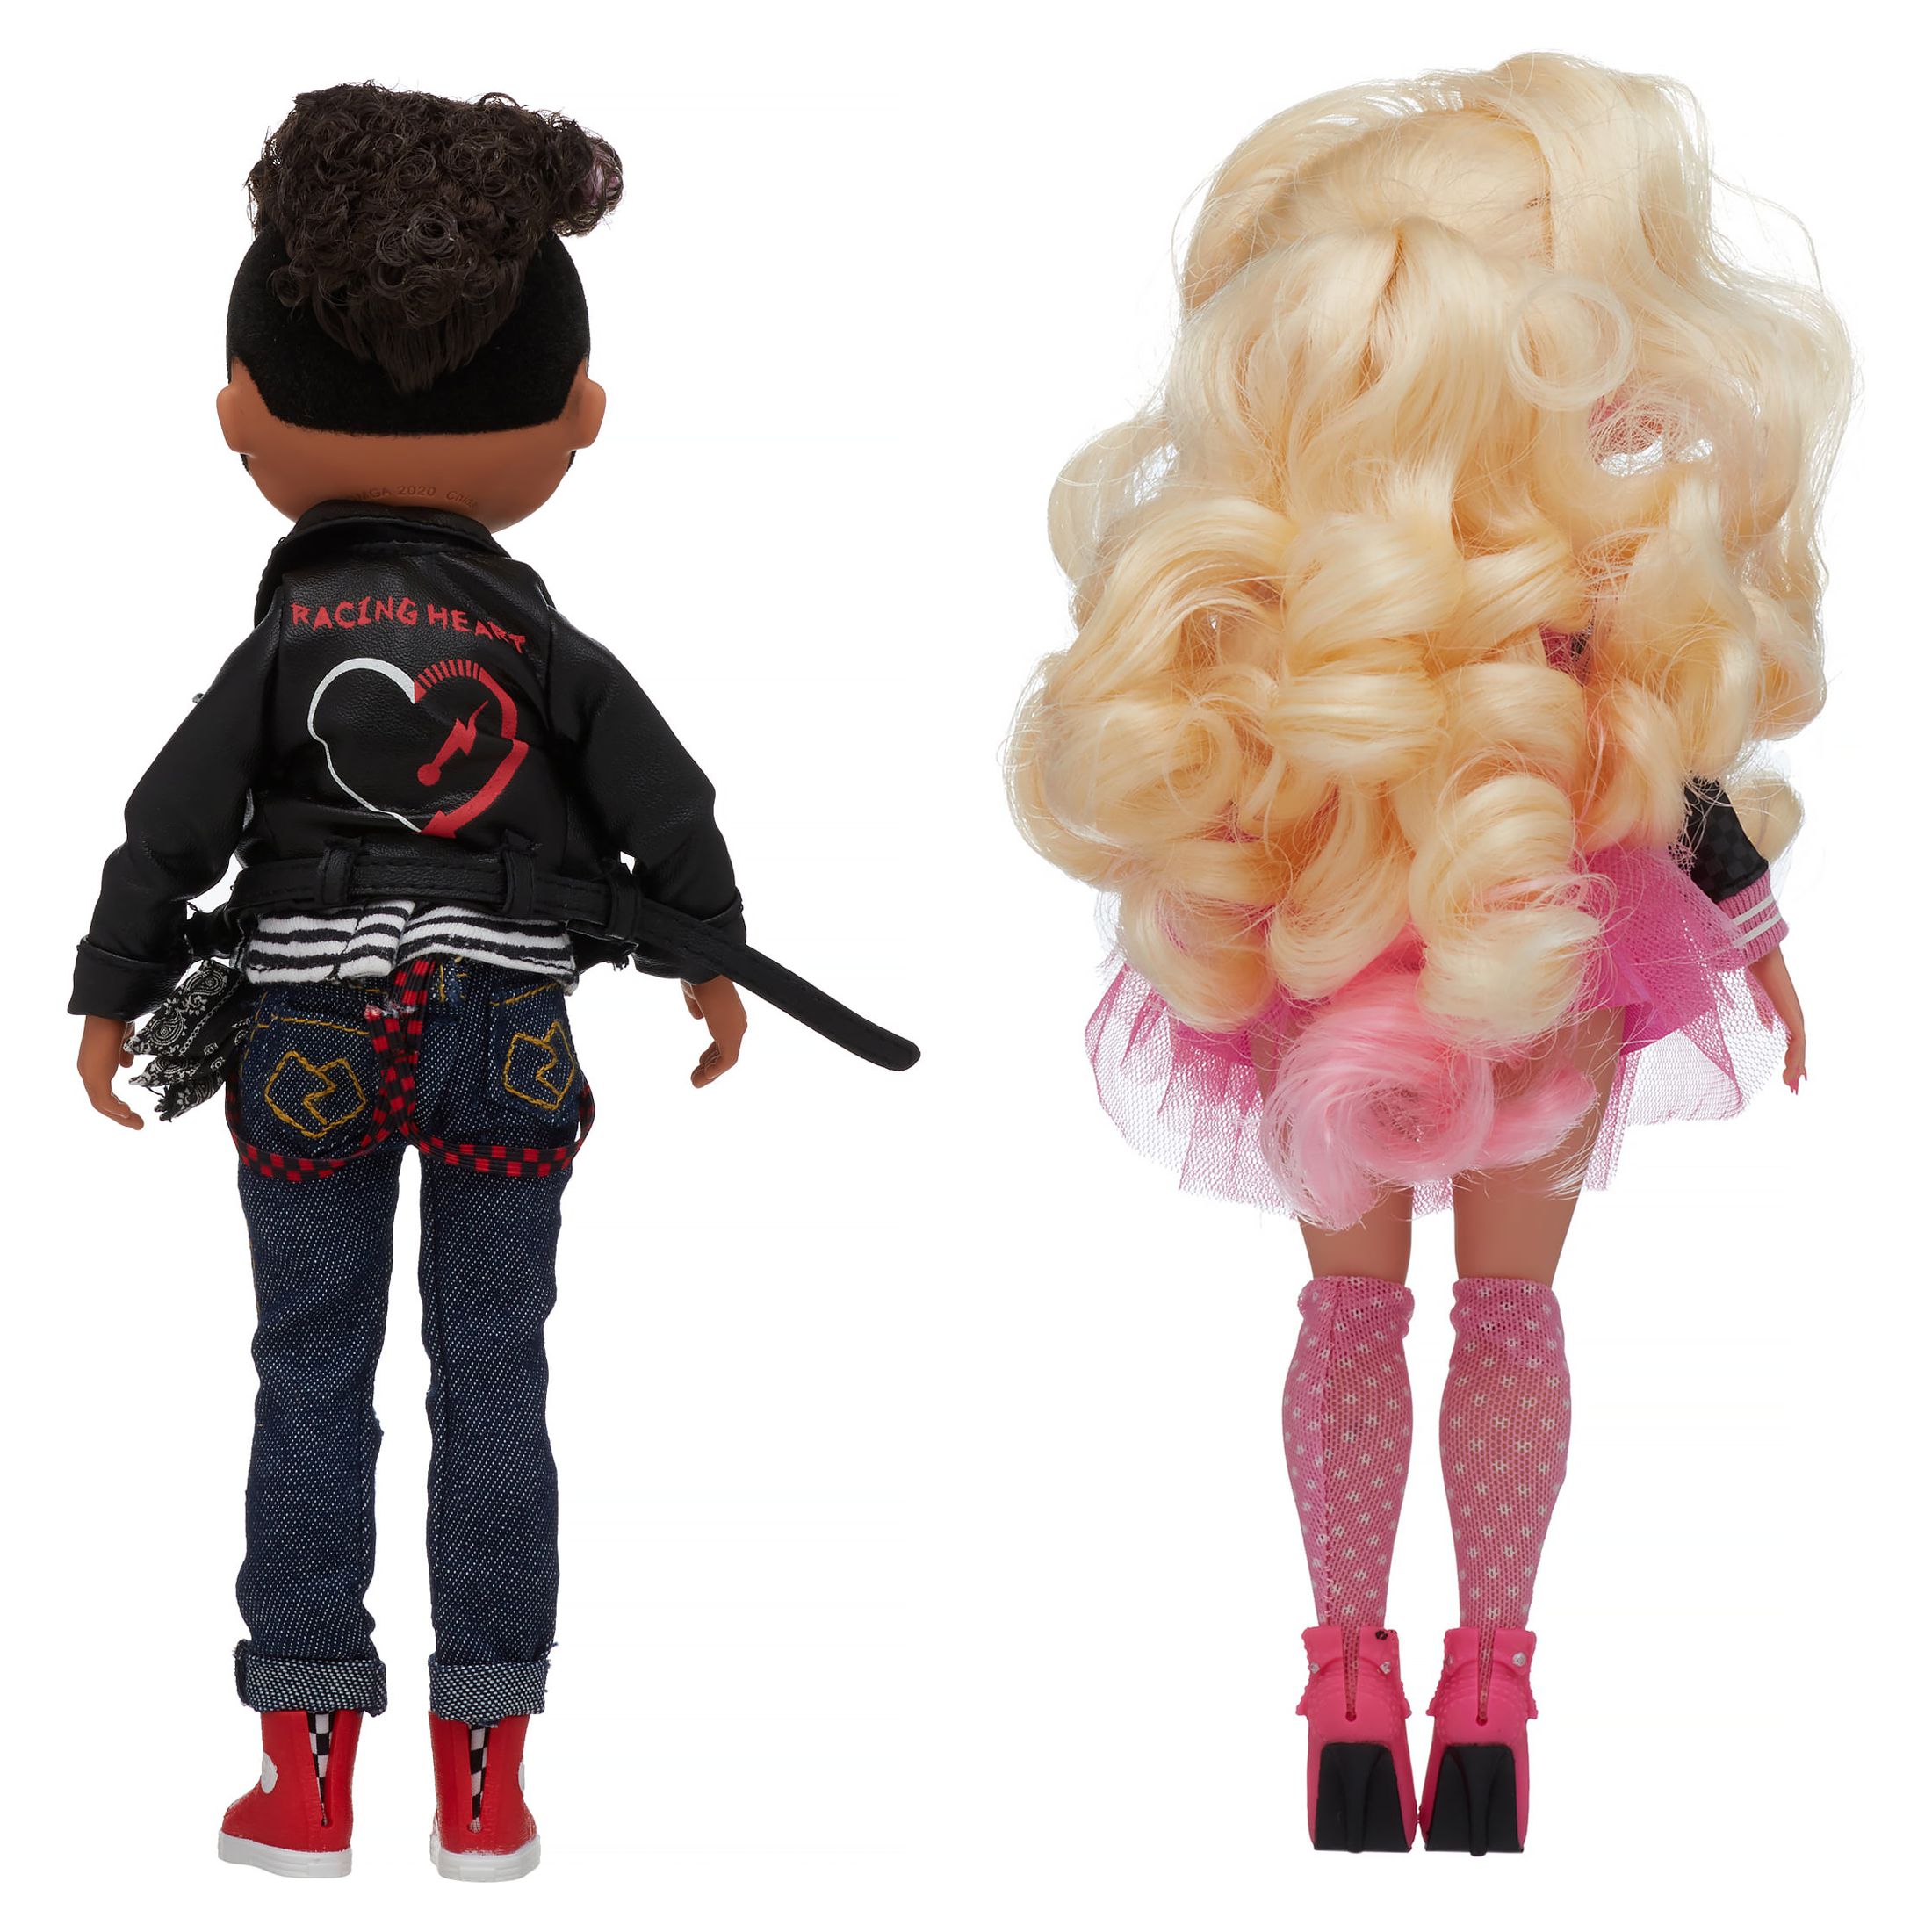 L.O.L Surprise! OMG Movie Magic Fashion Tough Dude and Pink Chick Doll Playset, 25 Pieecs - image 3 of 7